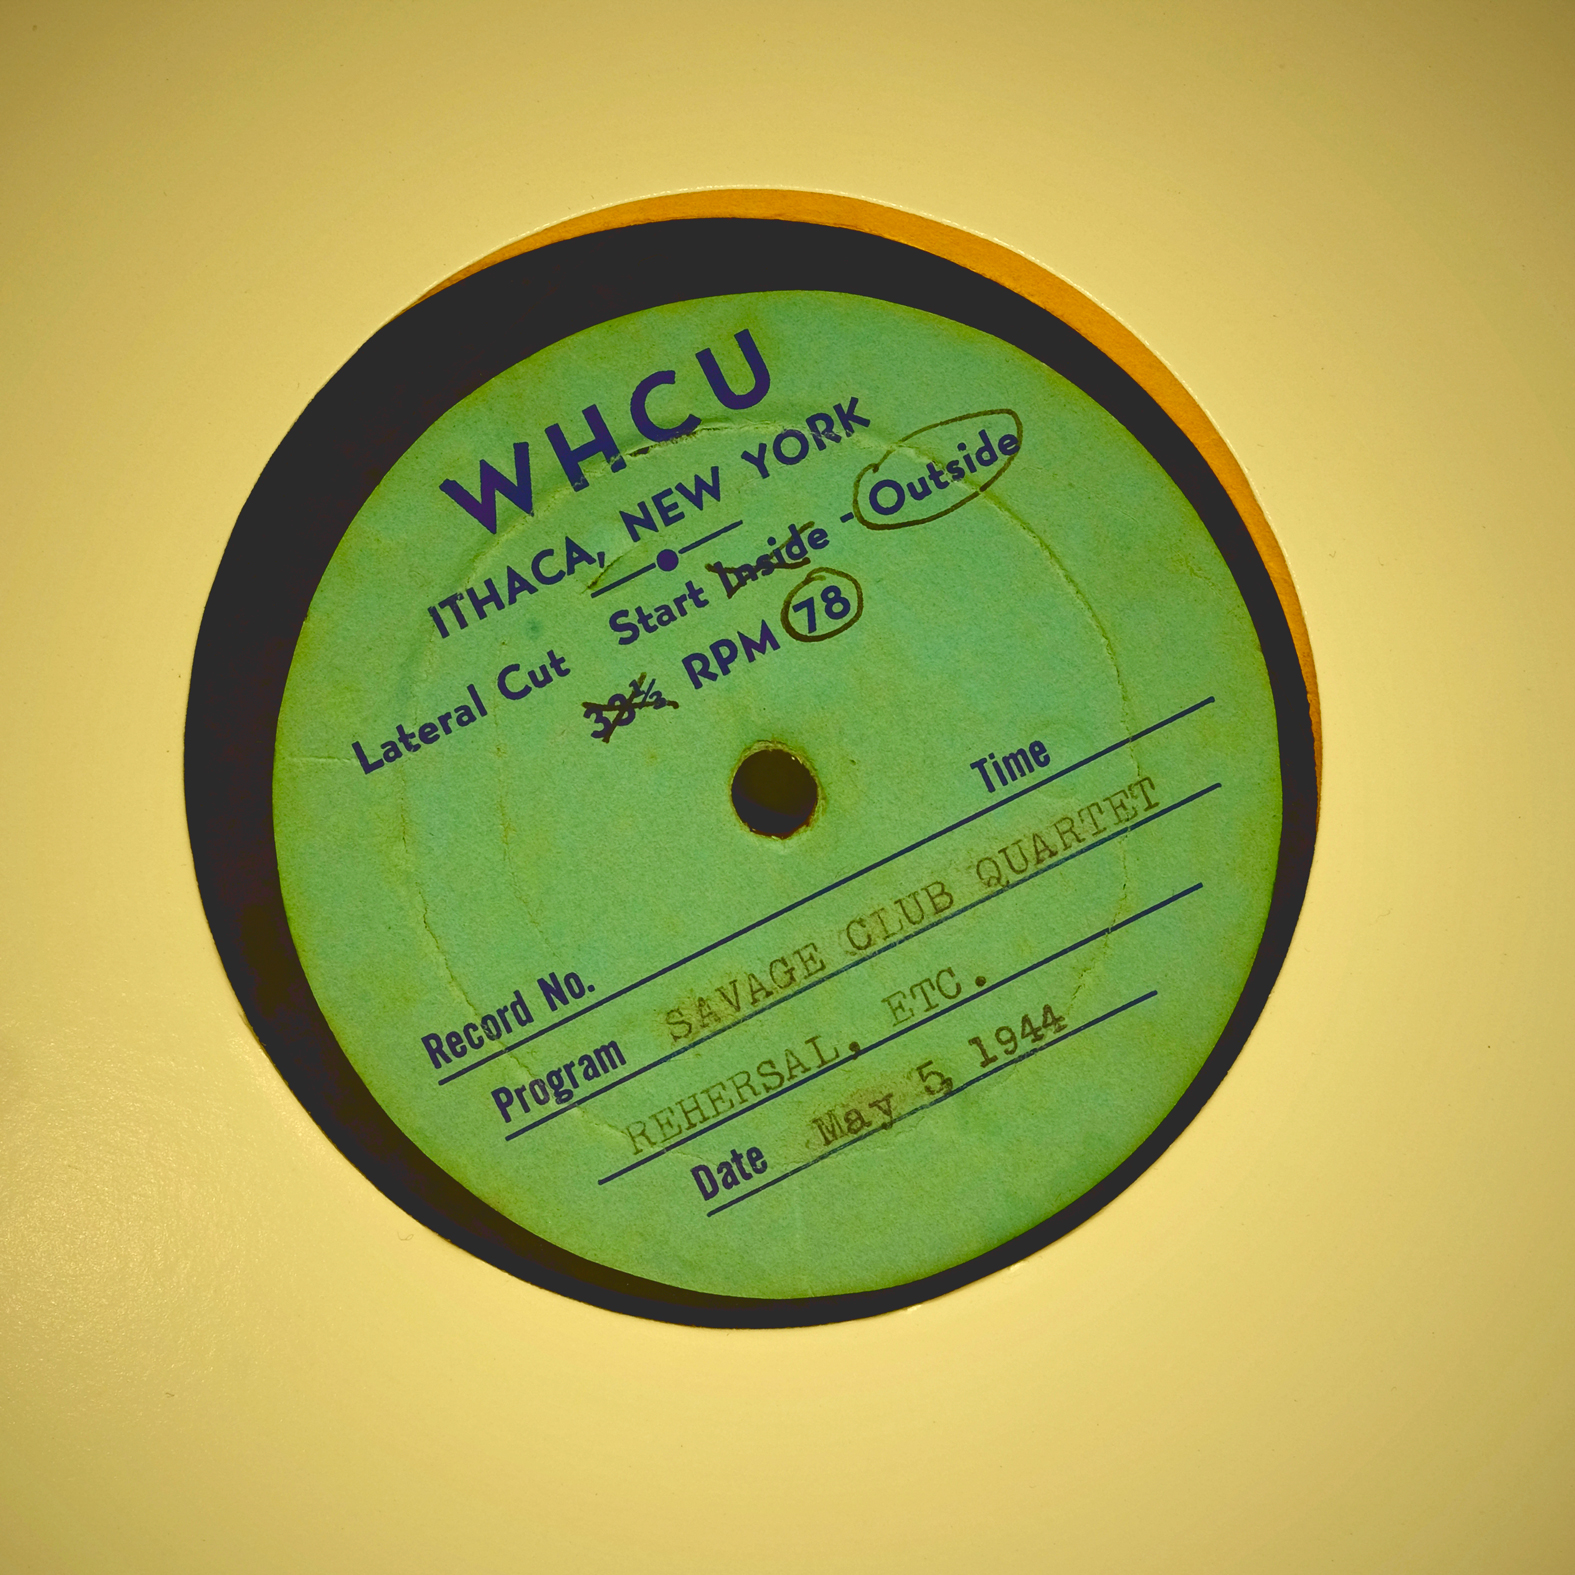 This 78 rpm record captures a 1944 Savage Club rehearsal at the WHCU radio station